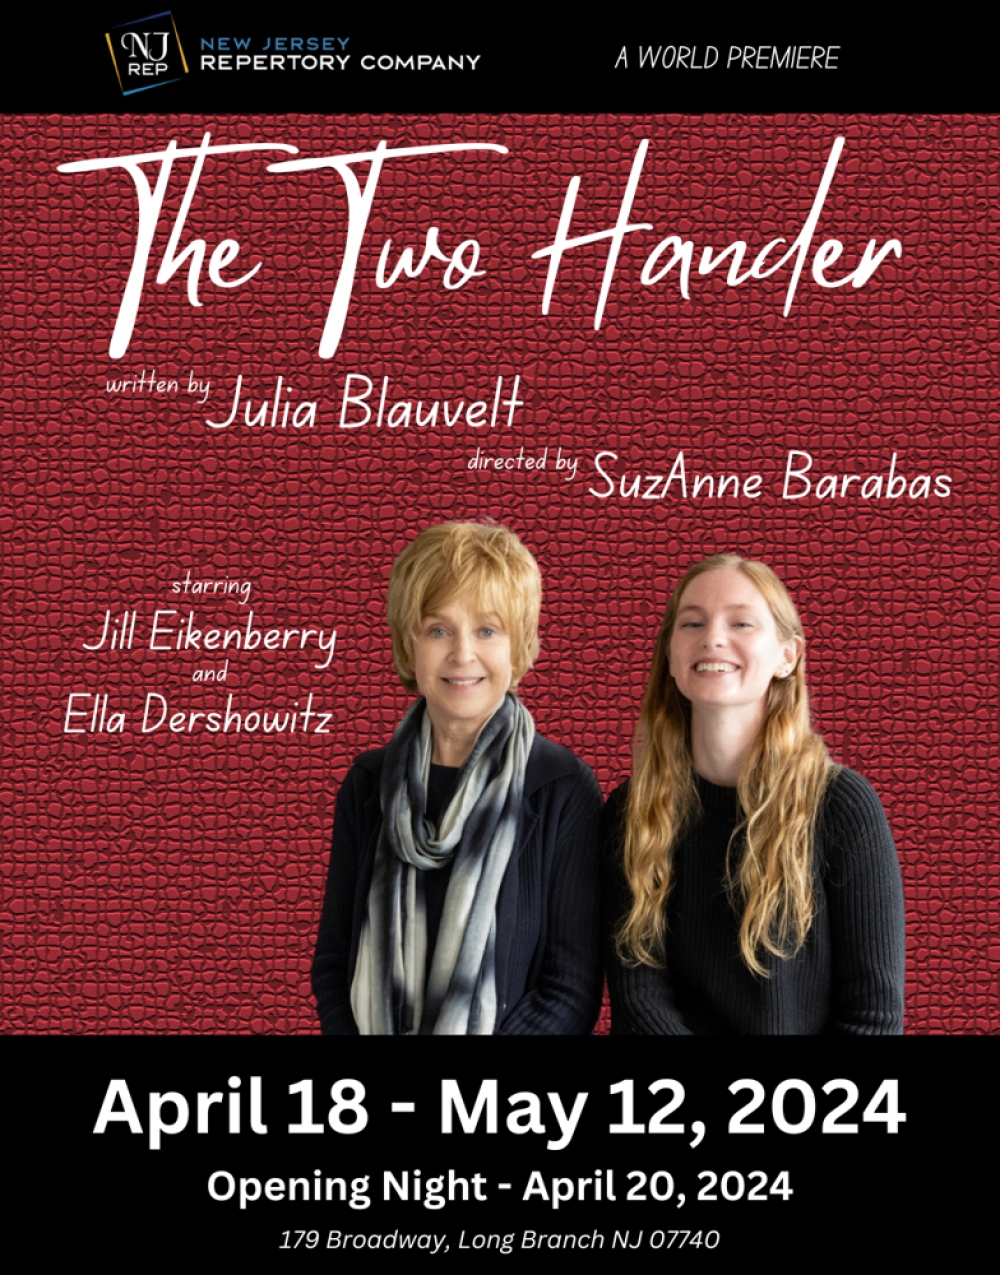 The Two Hander at New Jersey Repertory Company